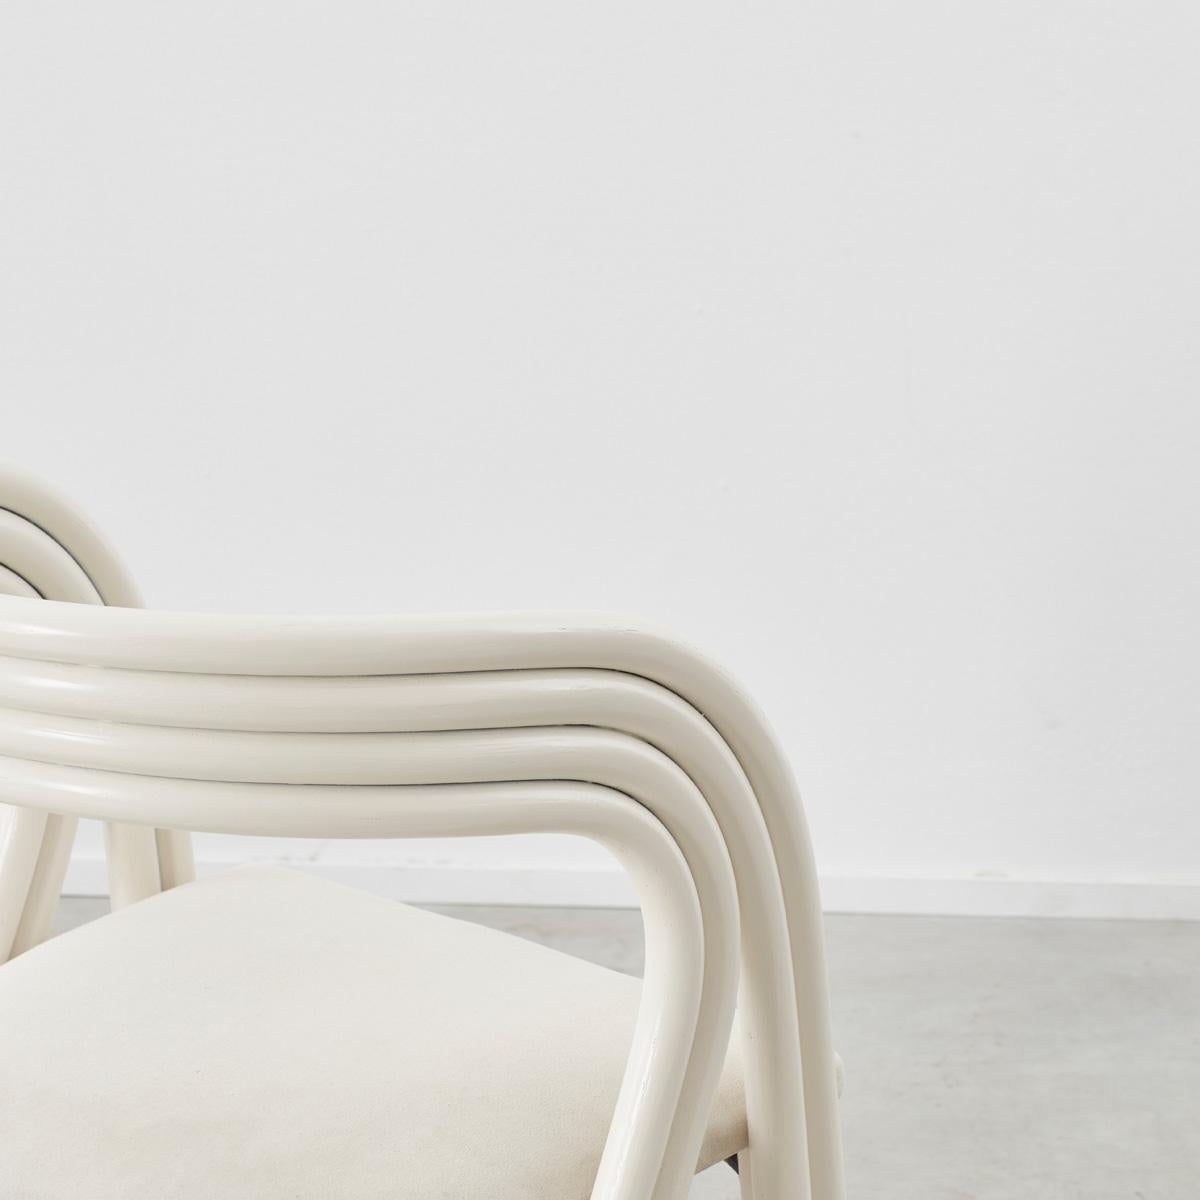 Suede Axel Enthoven chair for Rohé, Netherlands c1970